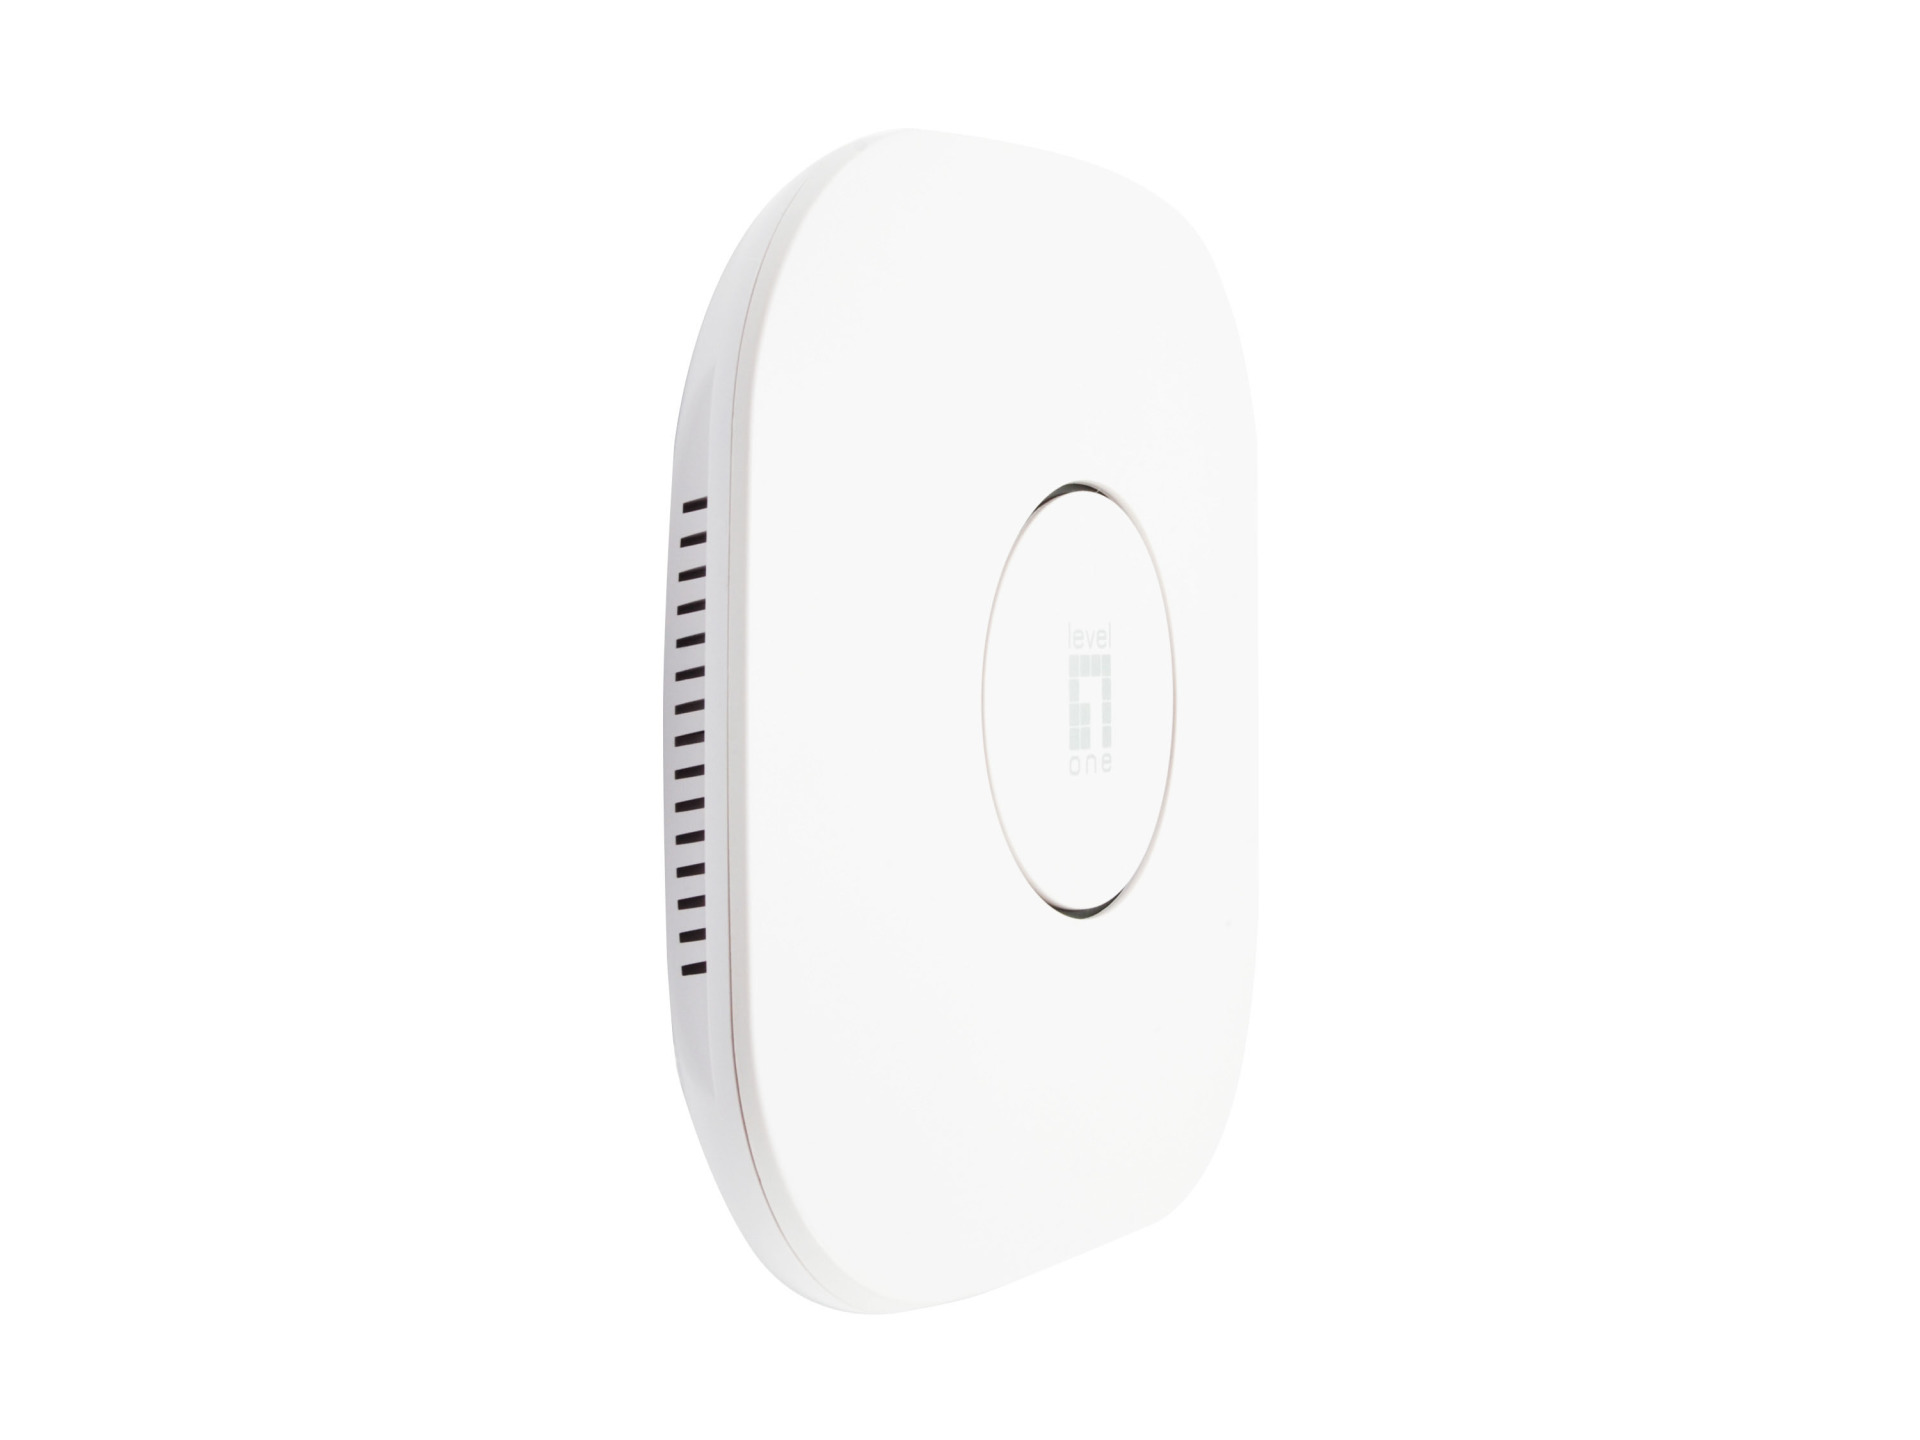 Managed PoE WLAN-Decken/Wand-Access-Point, 750Mbit/s, Dual-Band